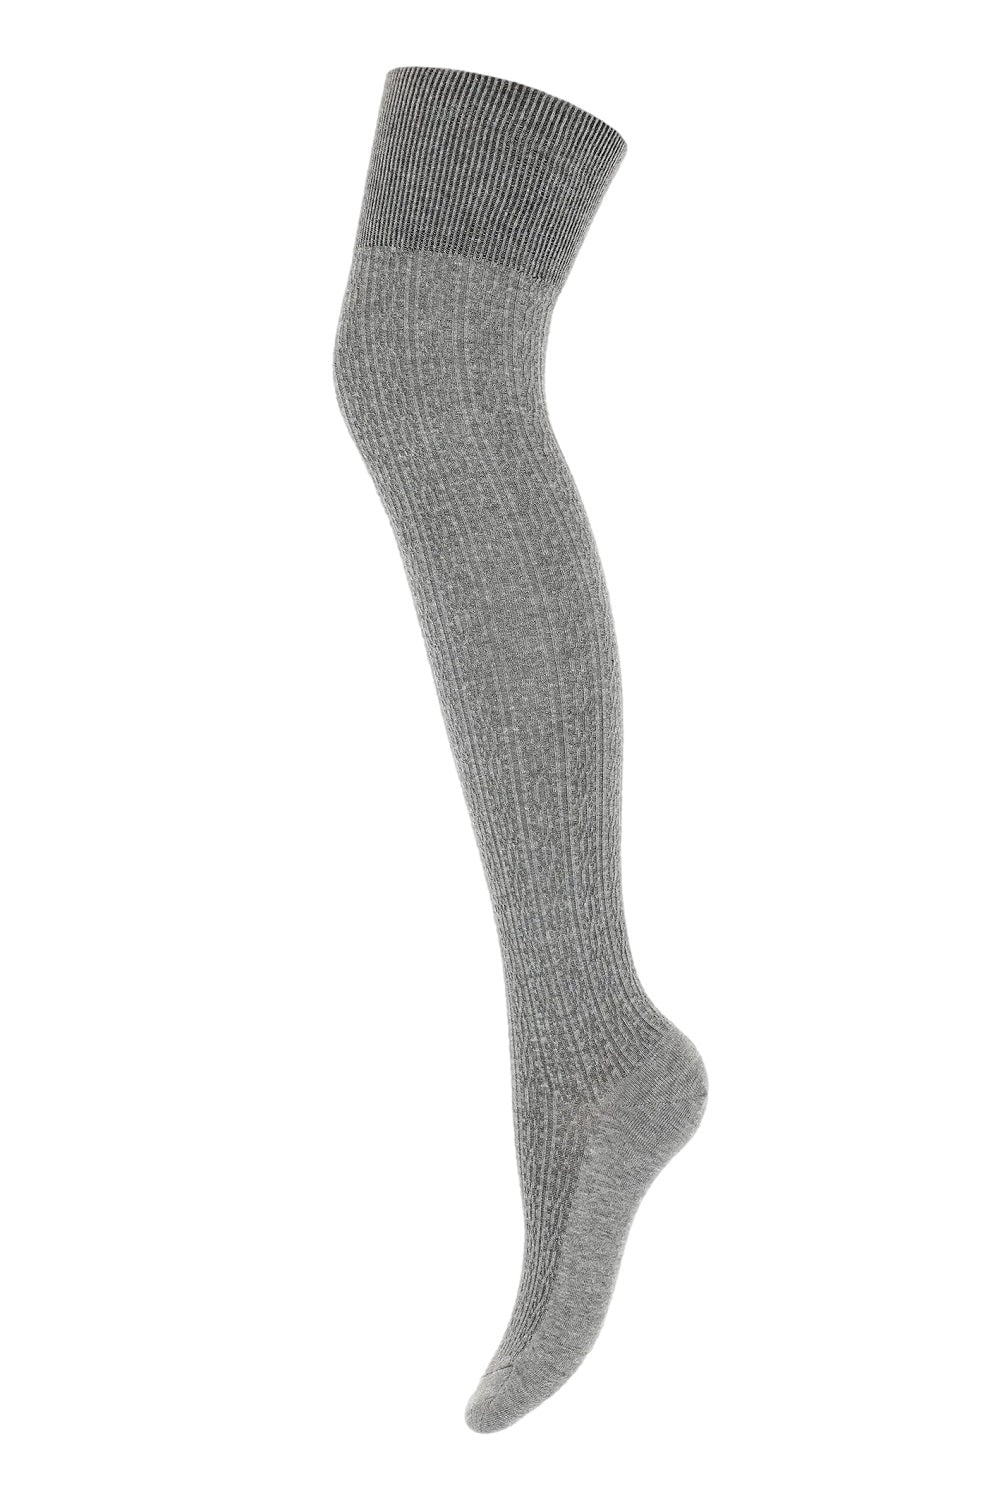 Zazu A40 Ribbed Cotton Over-the-Knee Socks in Grey